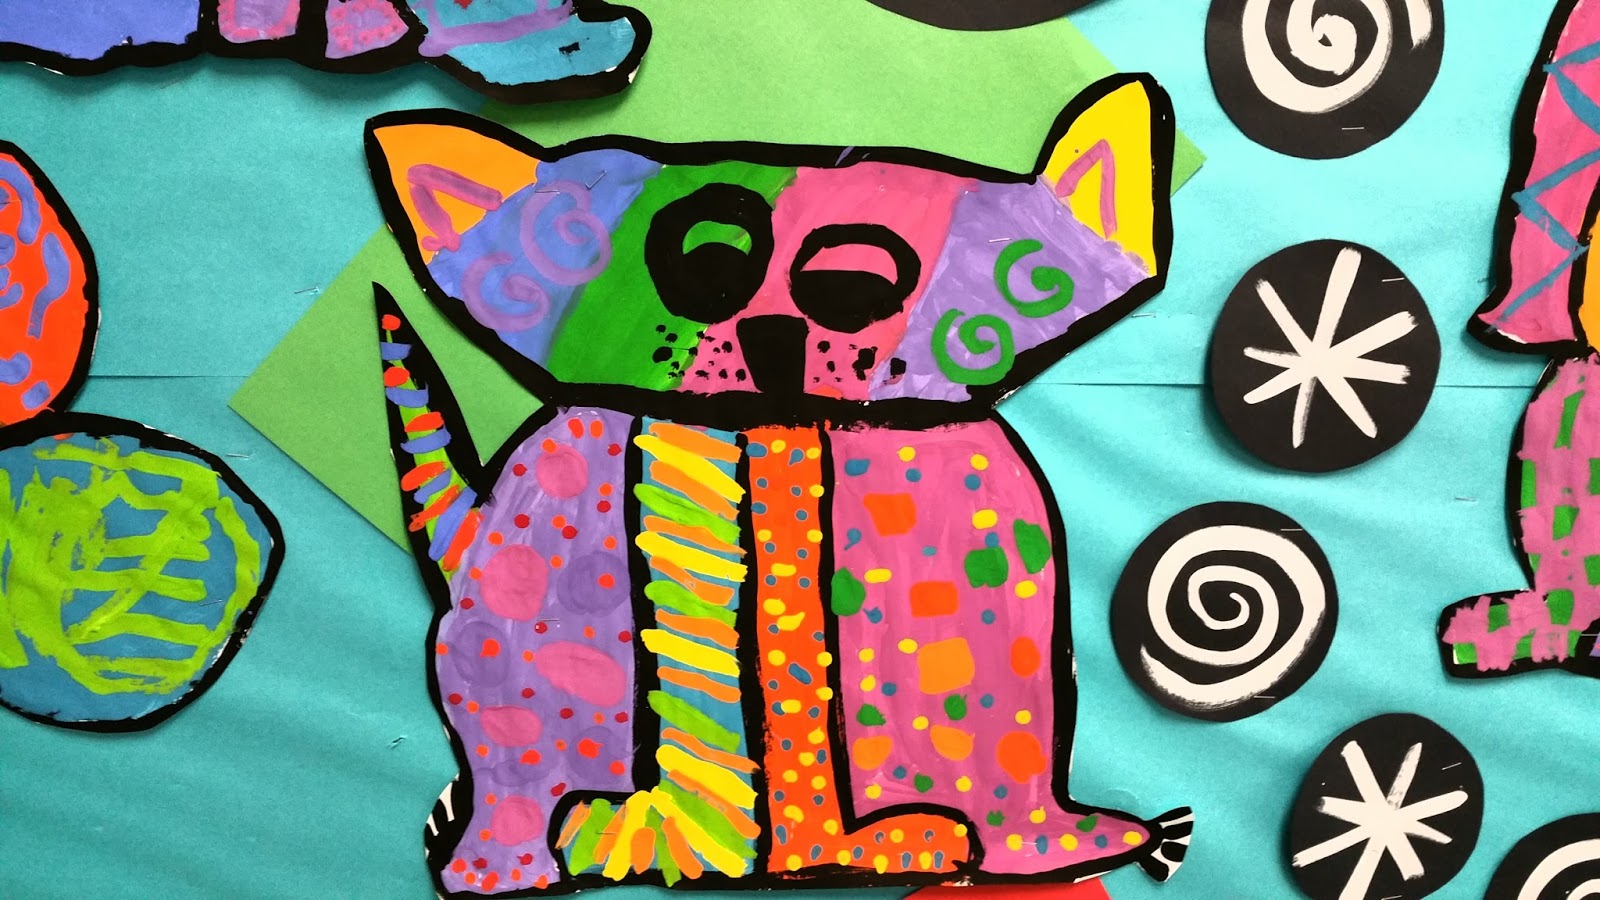 Paintbrush Rocket: 2nd Grade Romero Britto Cats and Dogs!